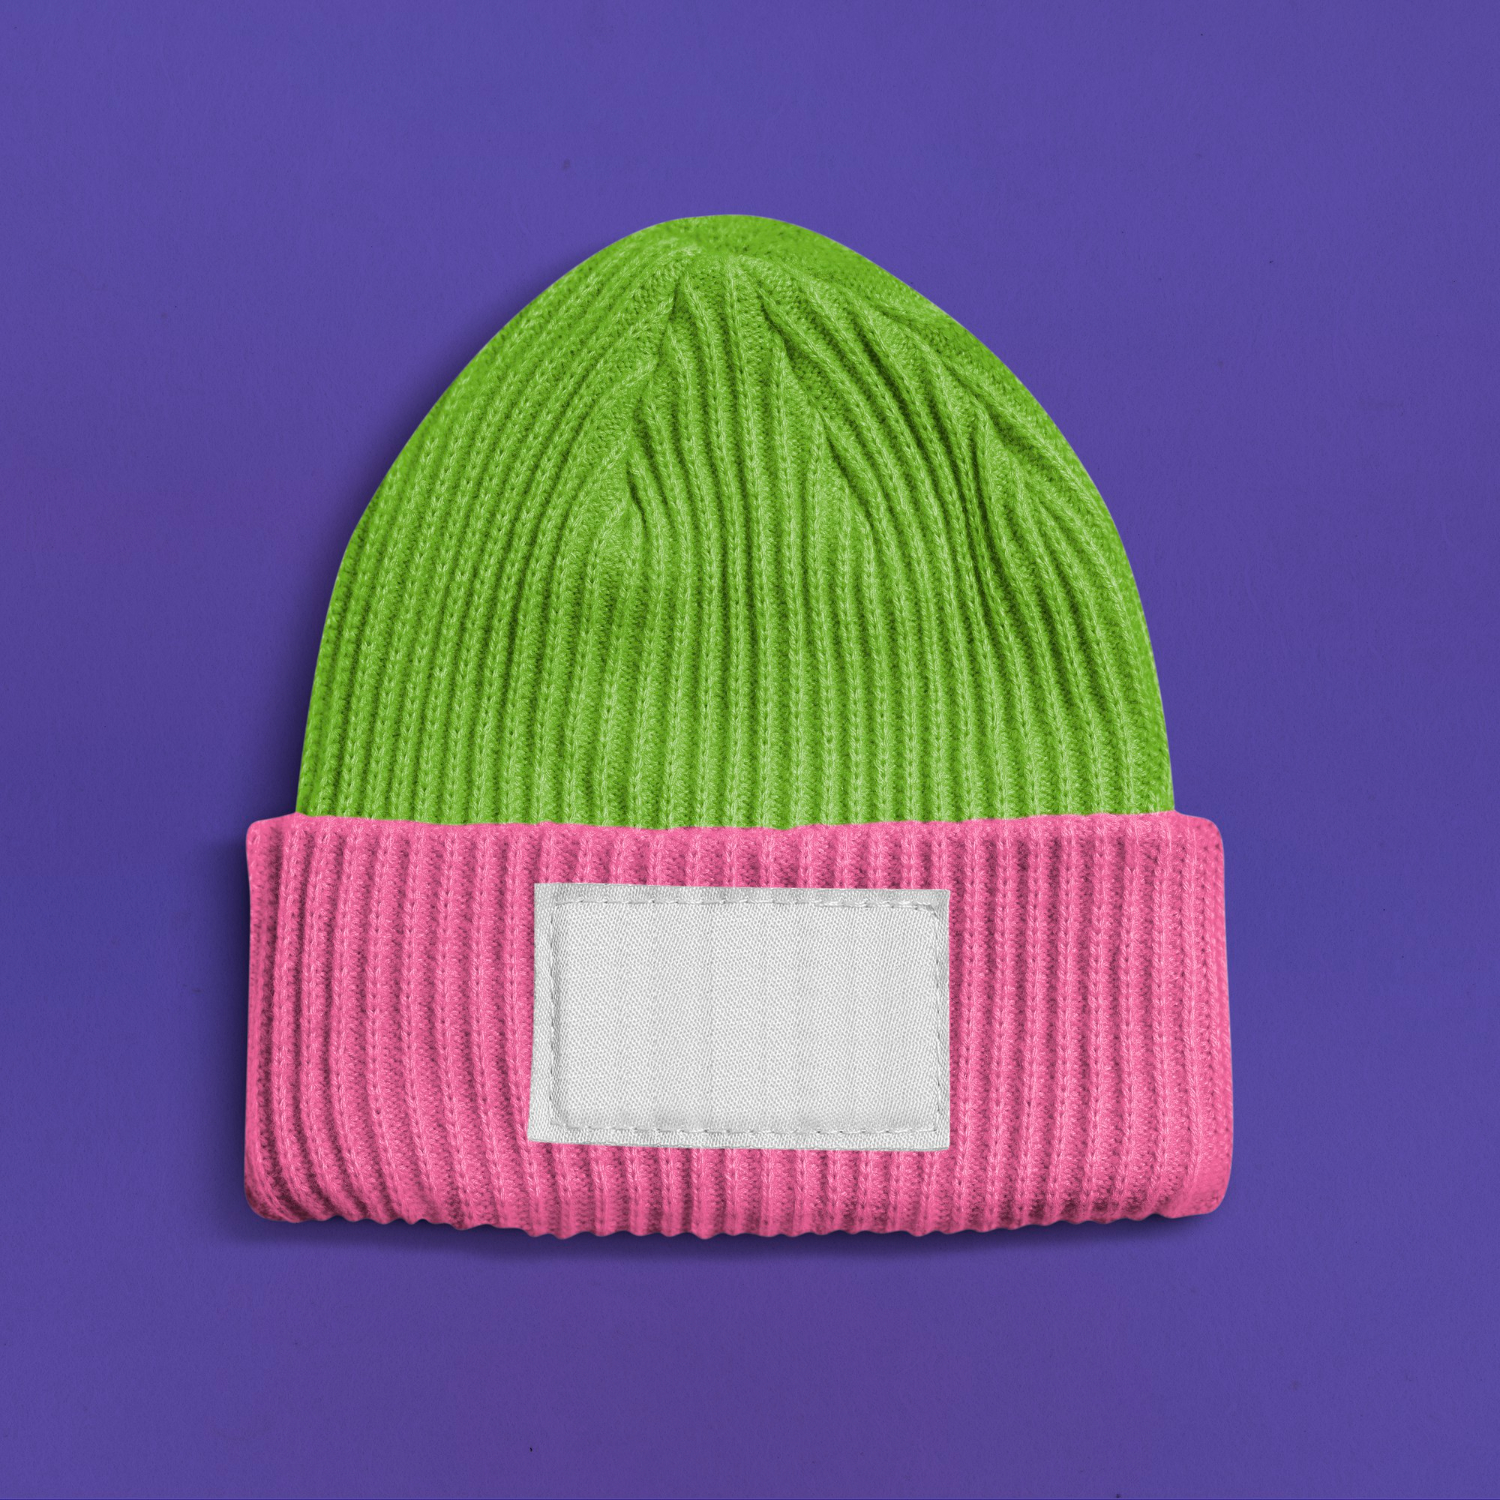 pink-green-beanie-with-blank-white-fabric-label-winter-accessories